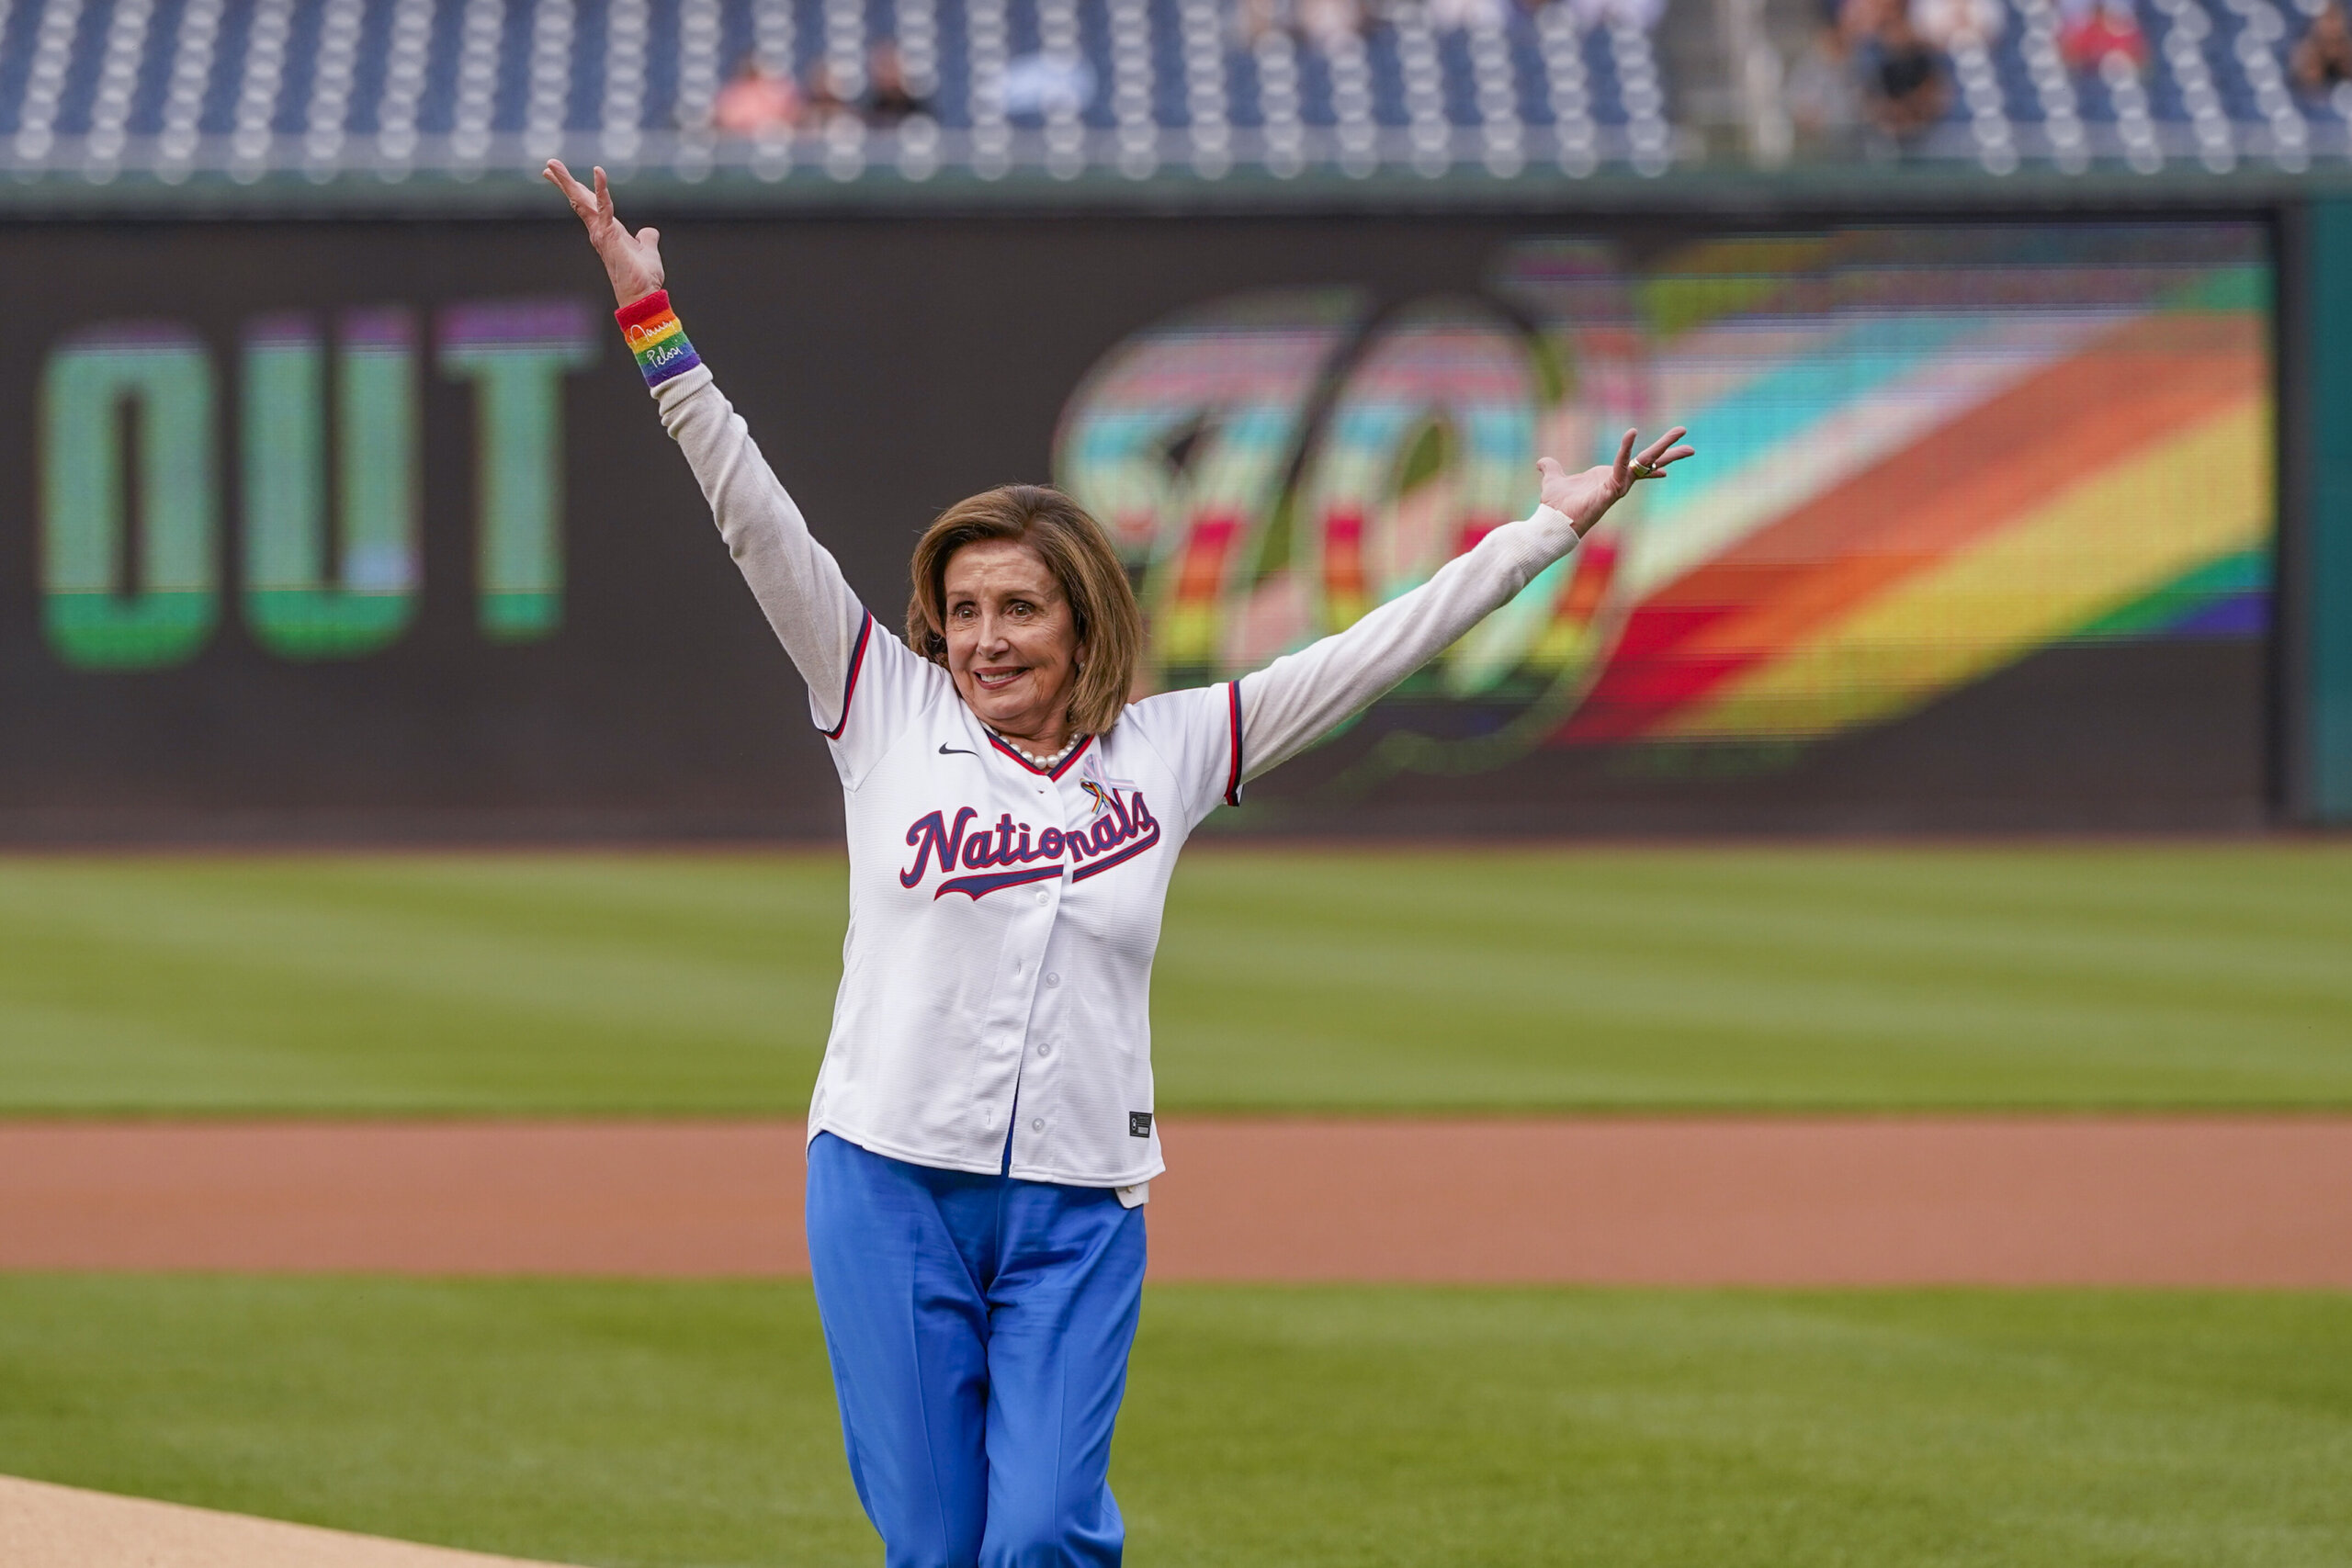 Former Speaker Pelosi throws out first pitch at Nationals' Pride night